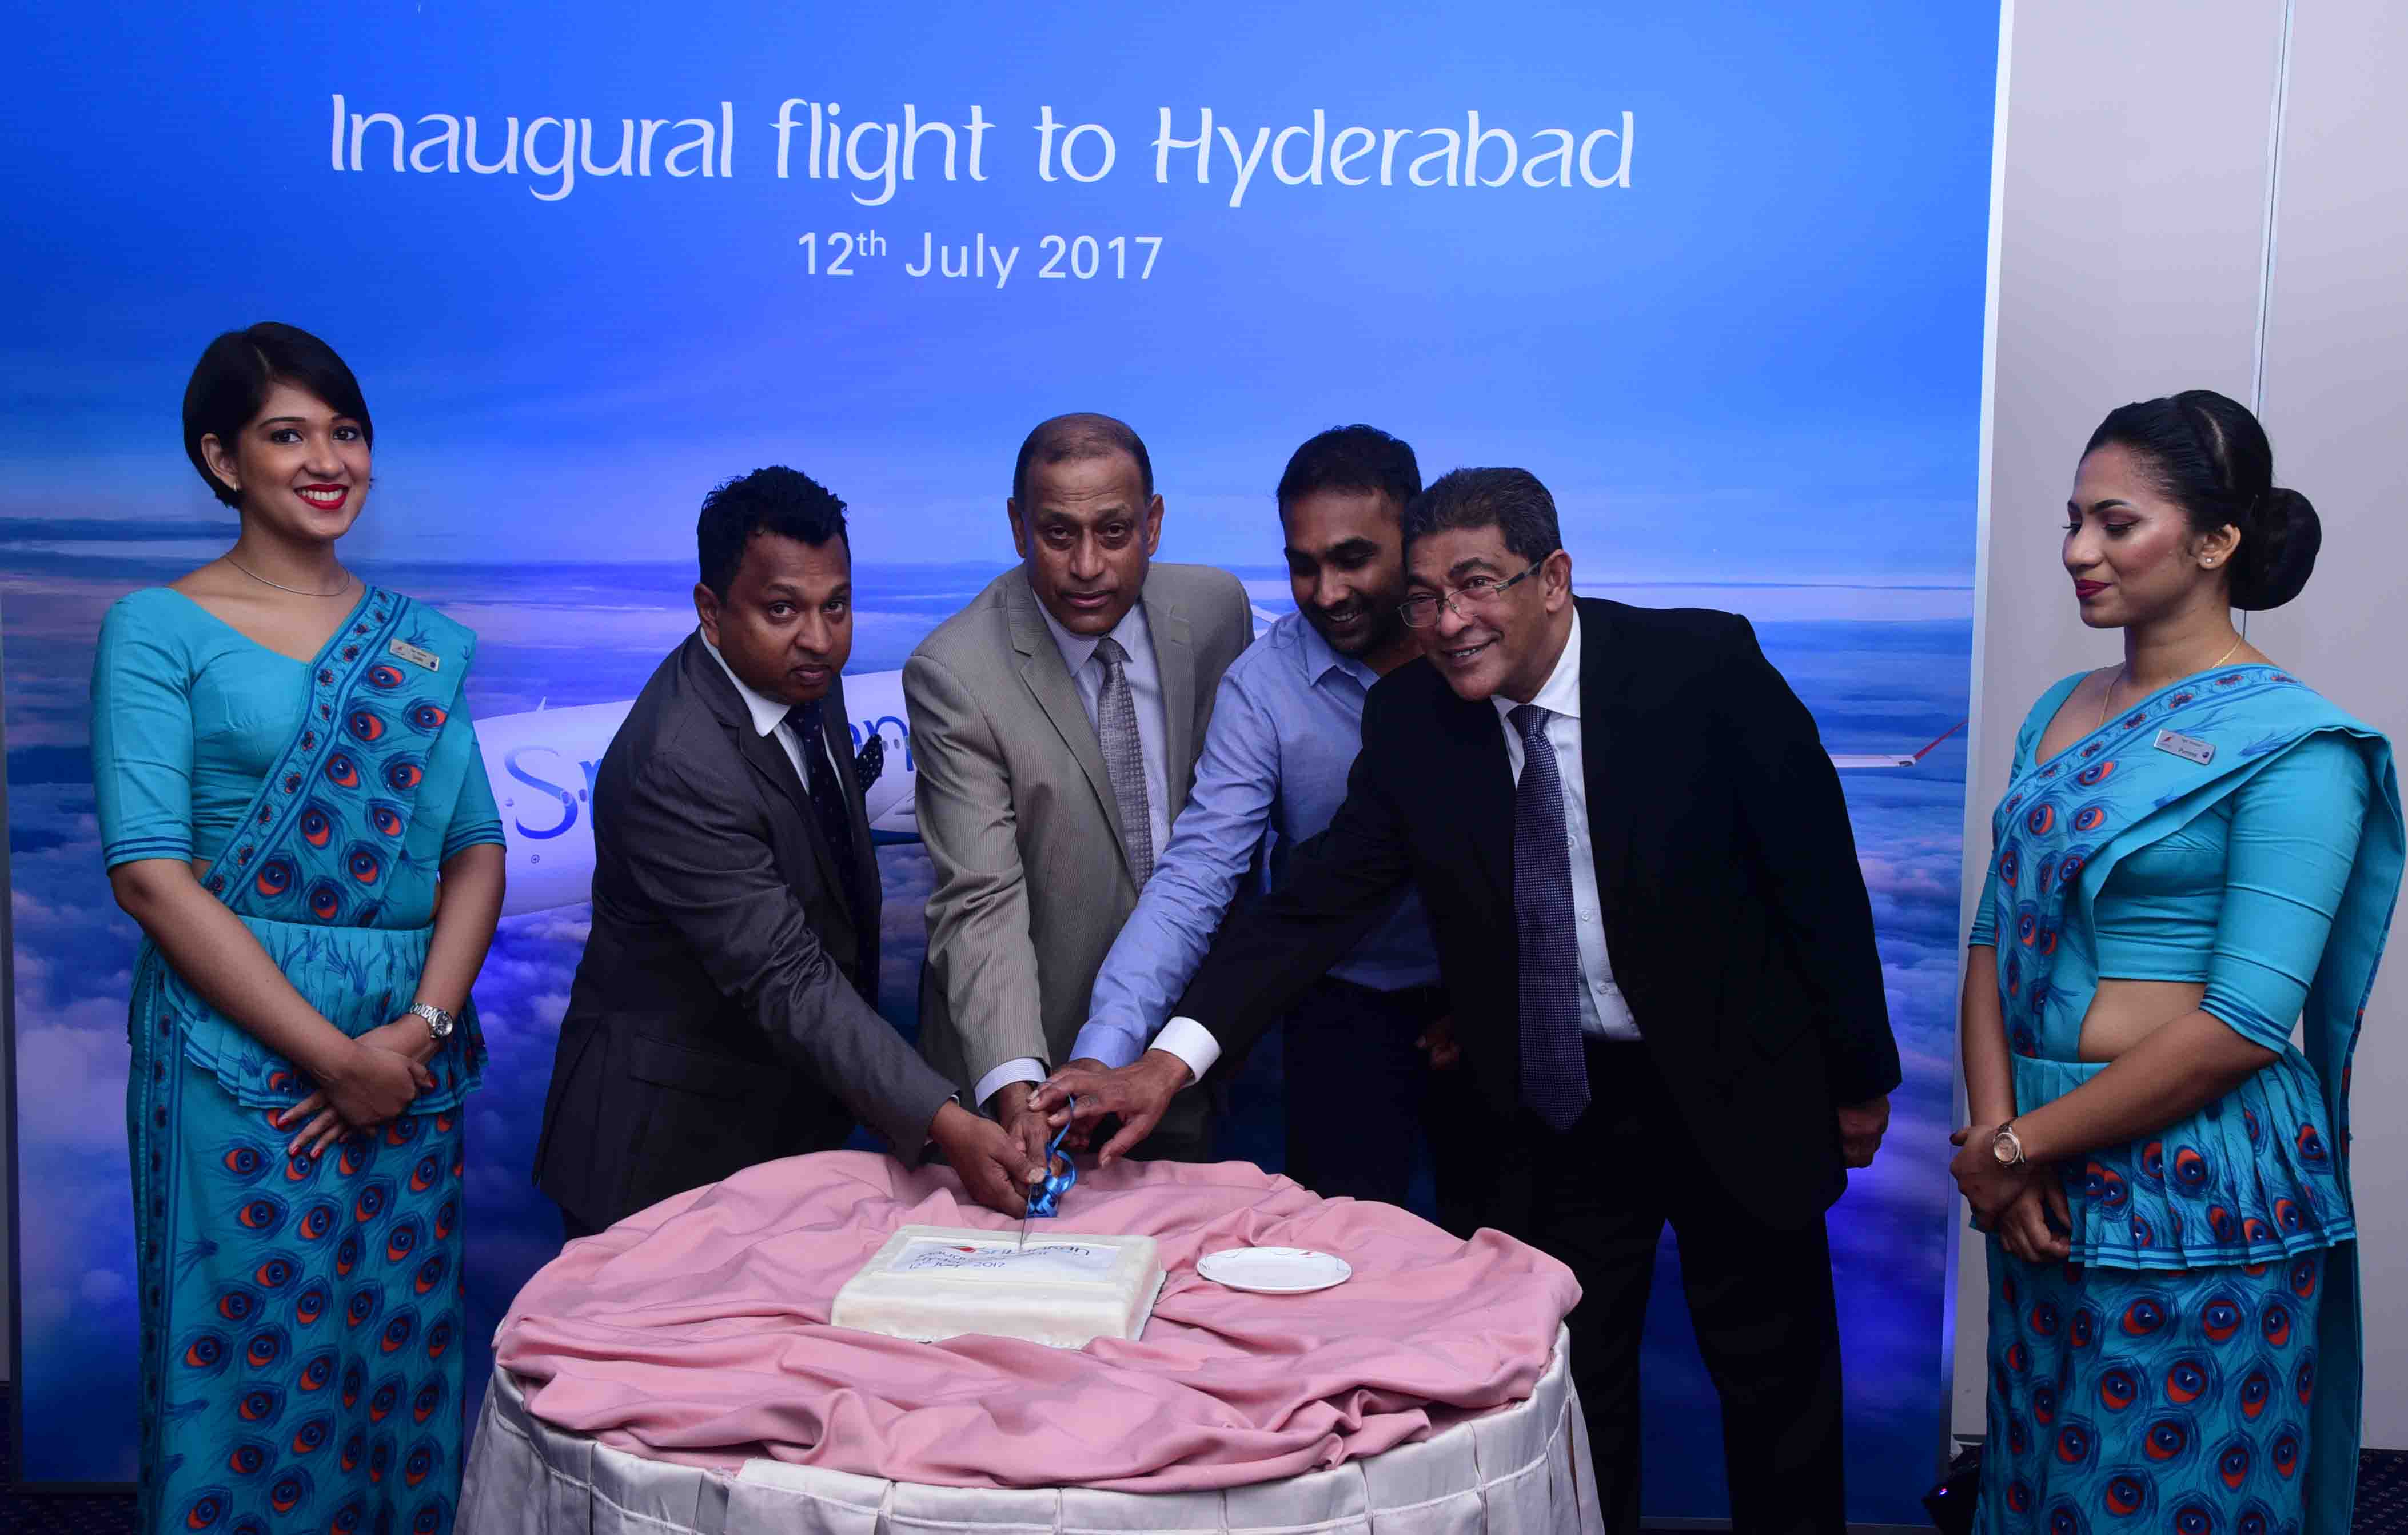 SriLankan Airlines, Director Mr. Harendra K. Balapatabendi together with Chief Commercial Officer Mr. Siva Ramachandran, Brand ambassador of SriLankan and former Sri Lanka Cricket  Captain Mr. Mahela Jayewardene and  SriLankan Airlines, Consultant Mr. Lal Perera cutting a cake minutes before the inaugural  flight to Hyderabad yesterday